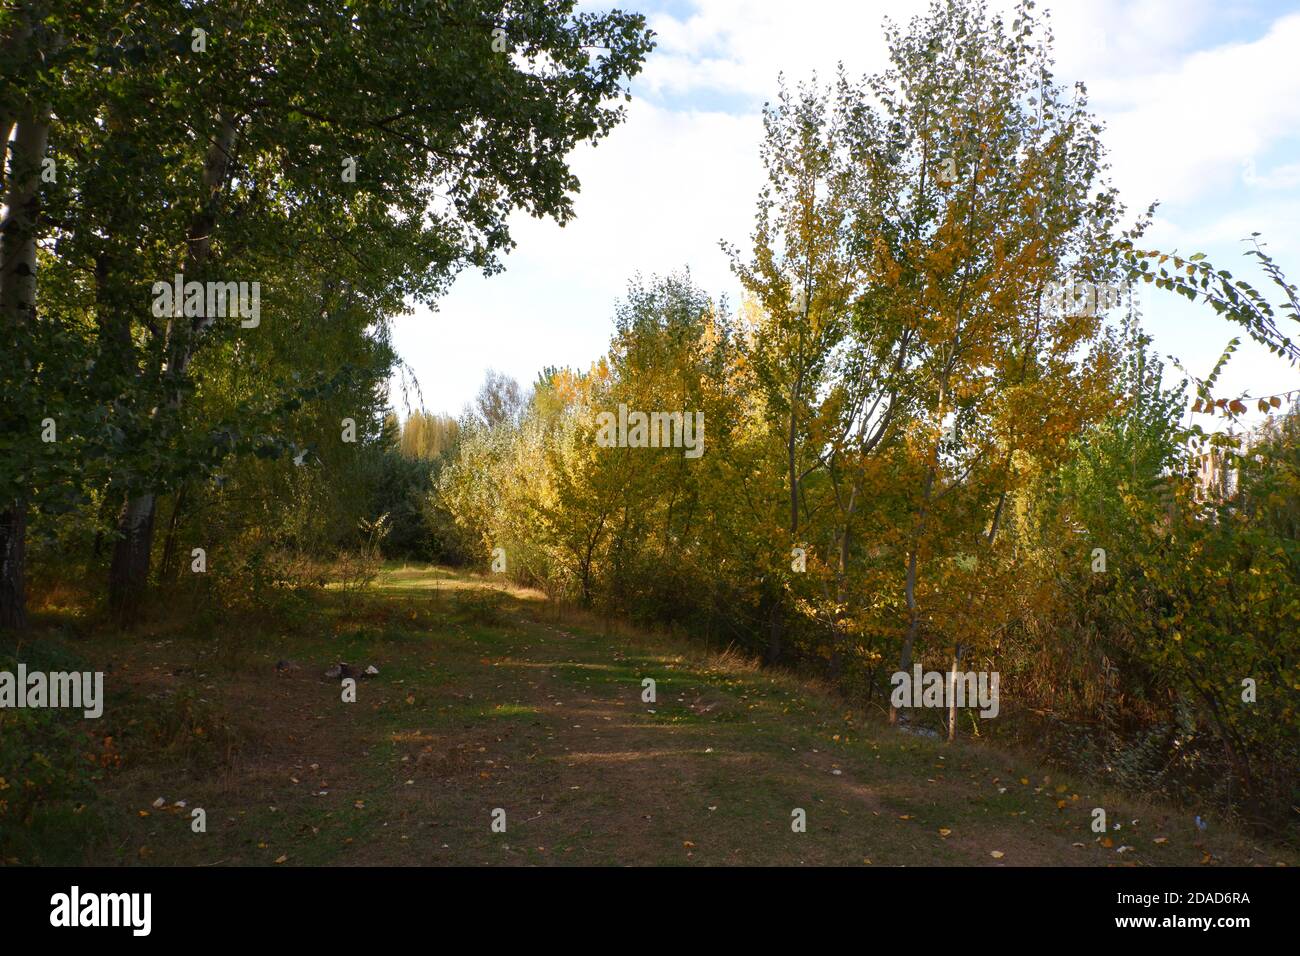 Yellow trees and leaves at autumn Stock Photo